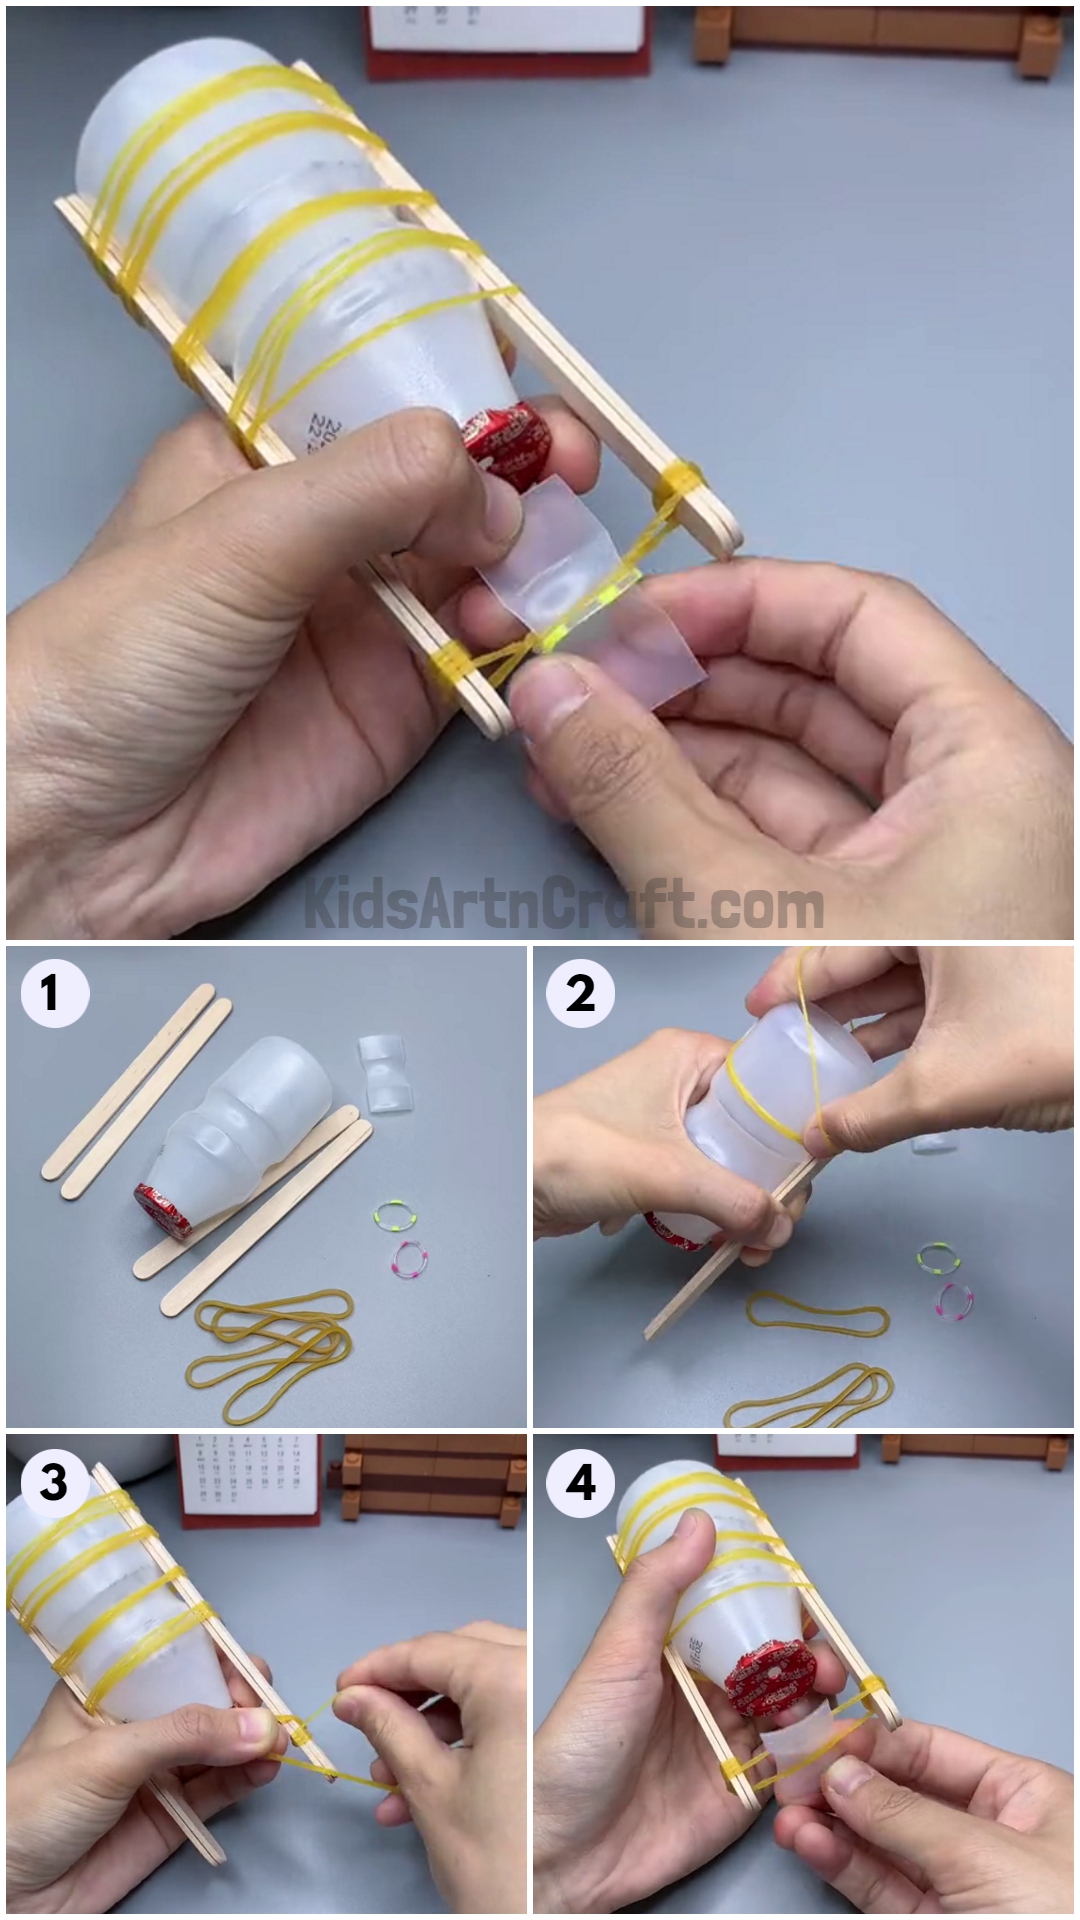 Learn to Make Rubber Band Boat Activity For Science Project Using Popsicle Sticks